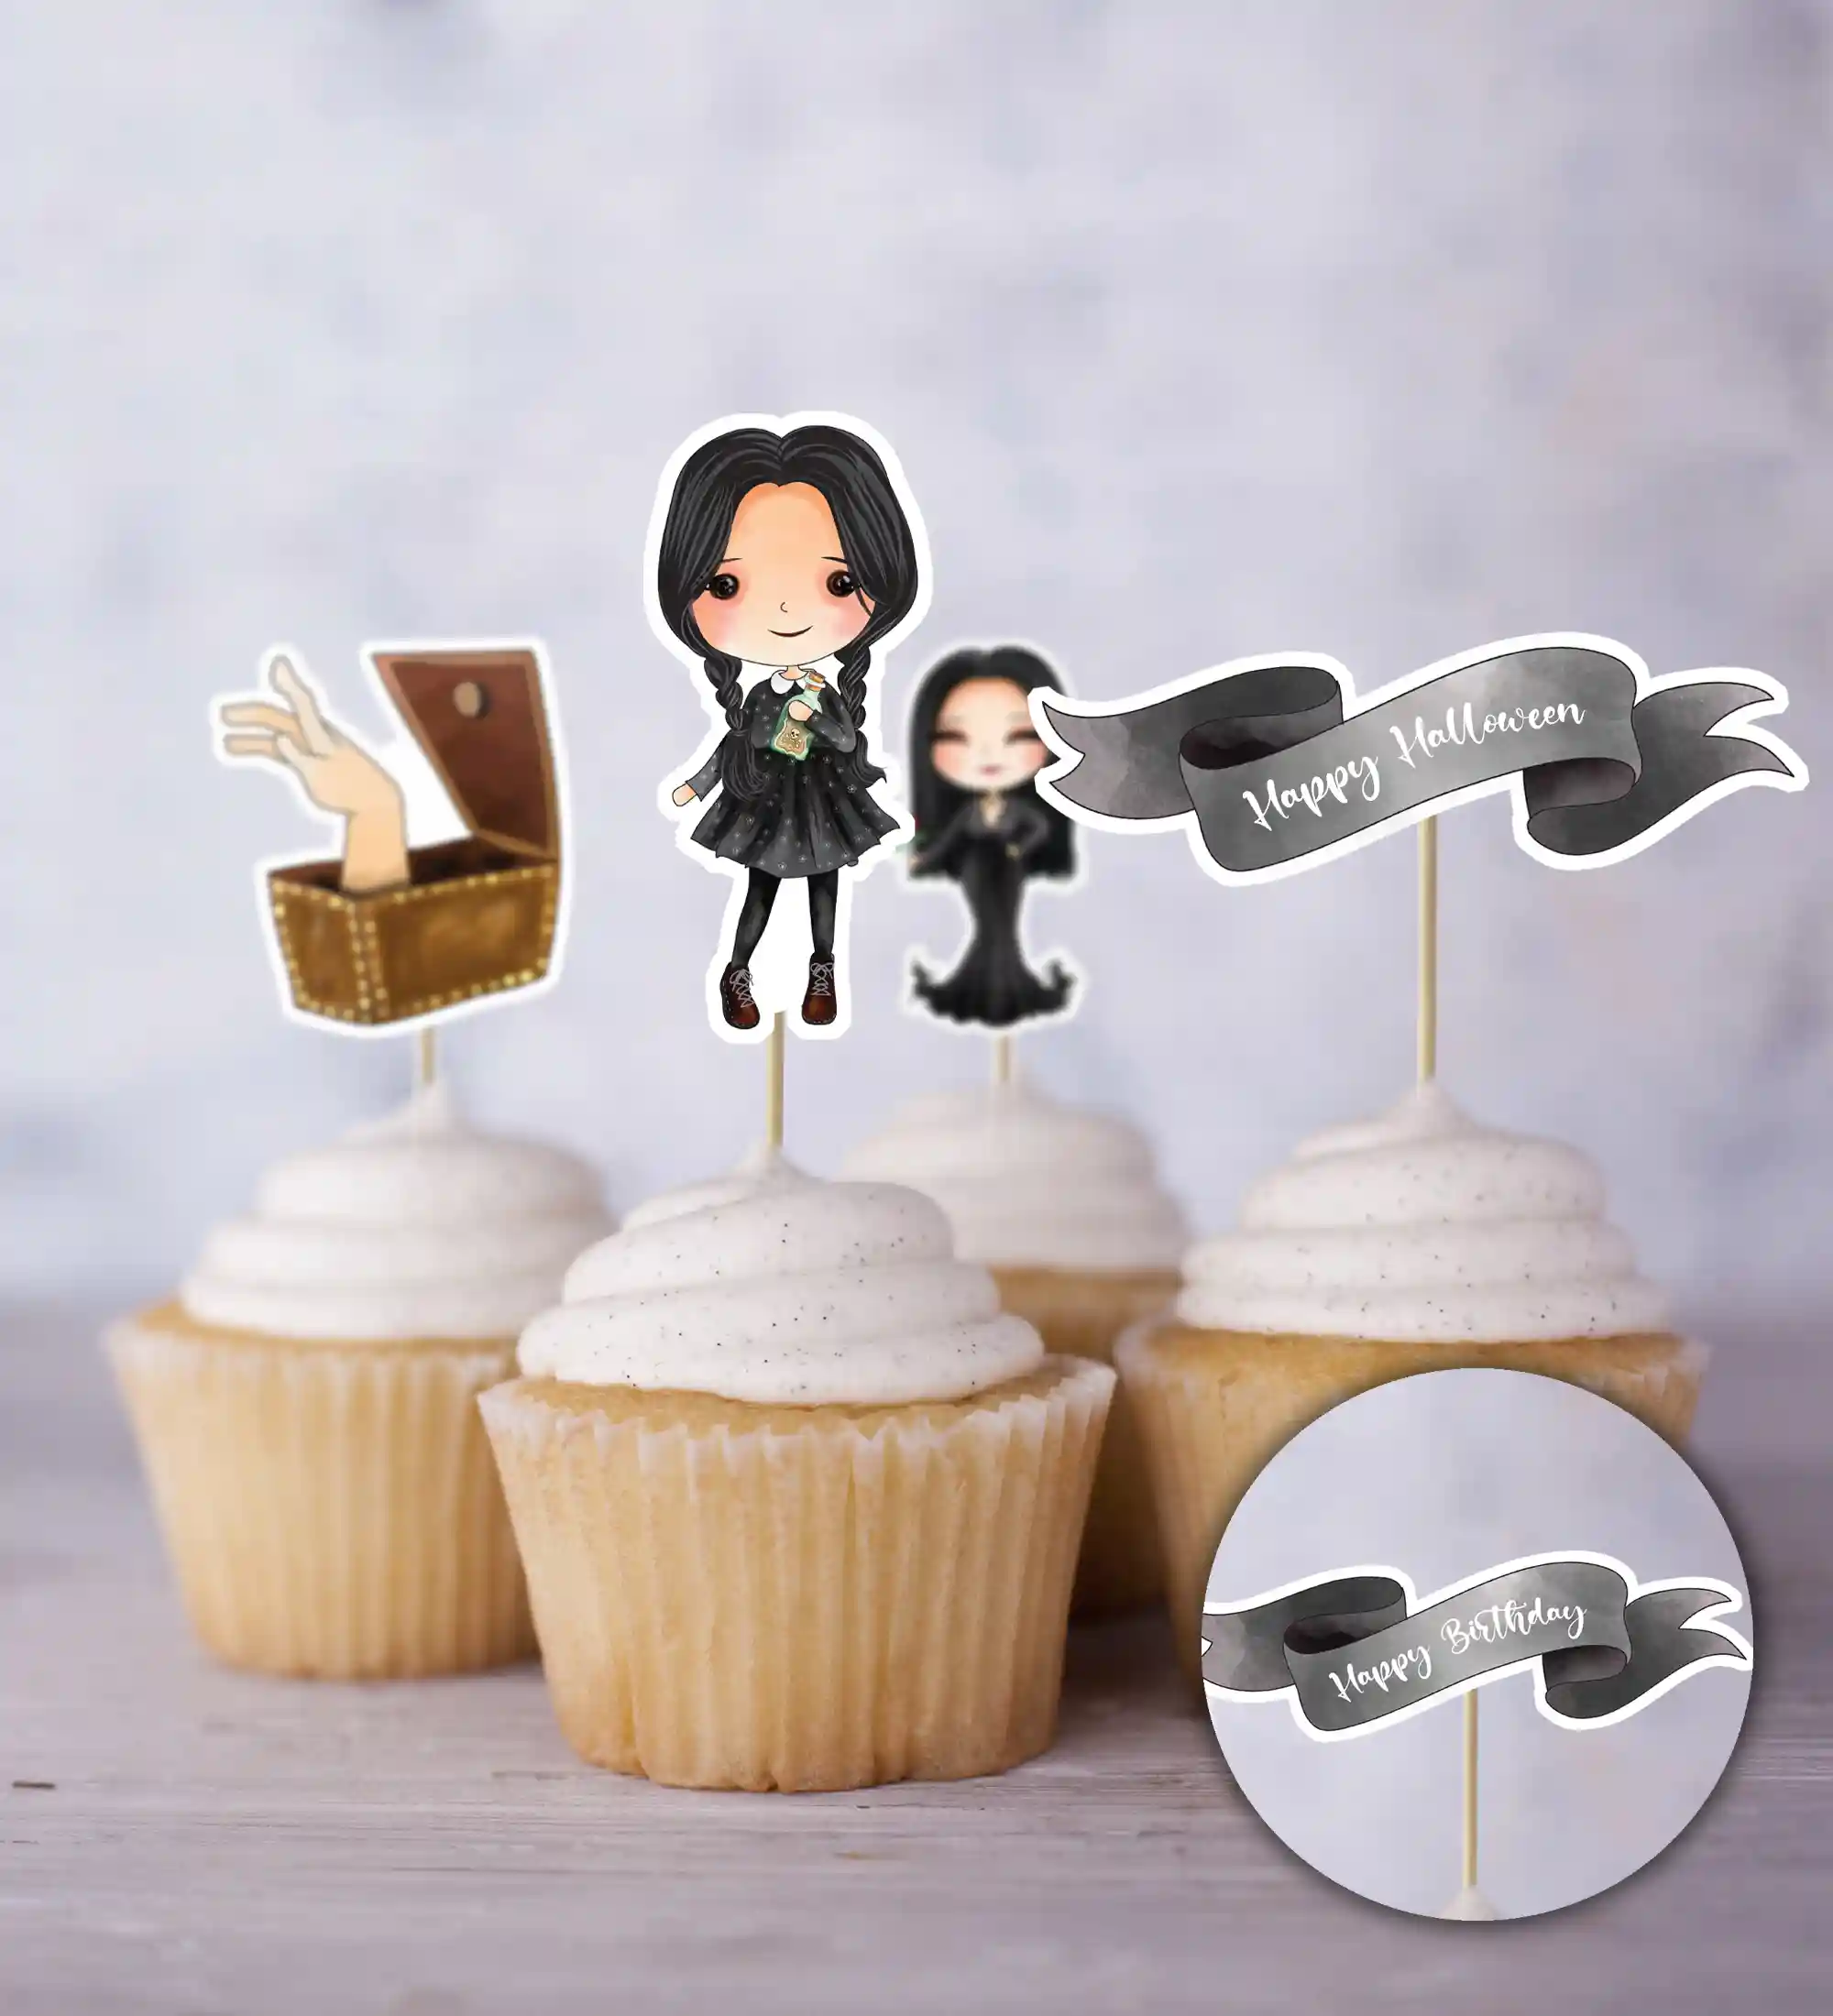 Addams family cupcake toppers. Download the printables for a Wednesday birthday party, Addams Family themed baby shower, or a Wednesday viewing party. Cupcake toppers include Cousin Itt, Wednesday, Morticia, Gomez, Lurch, and more.